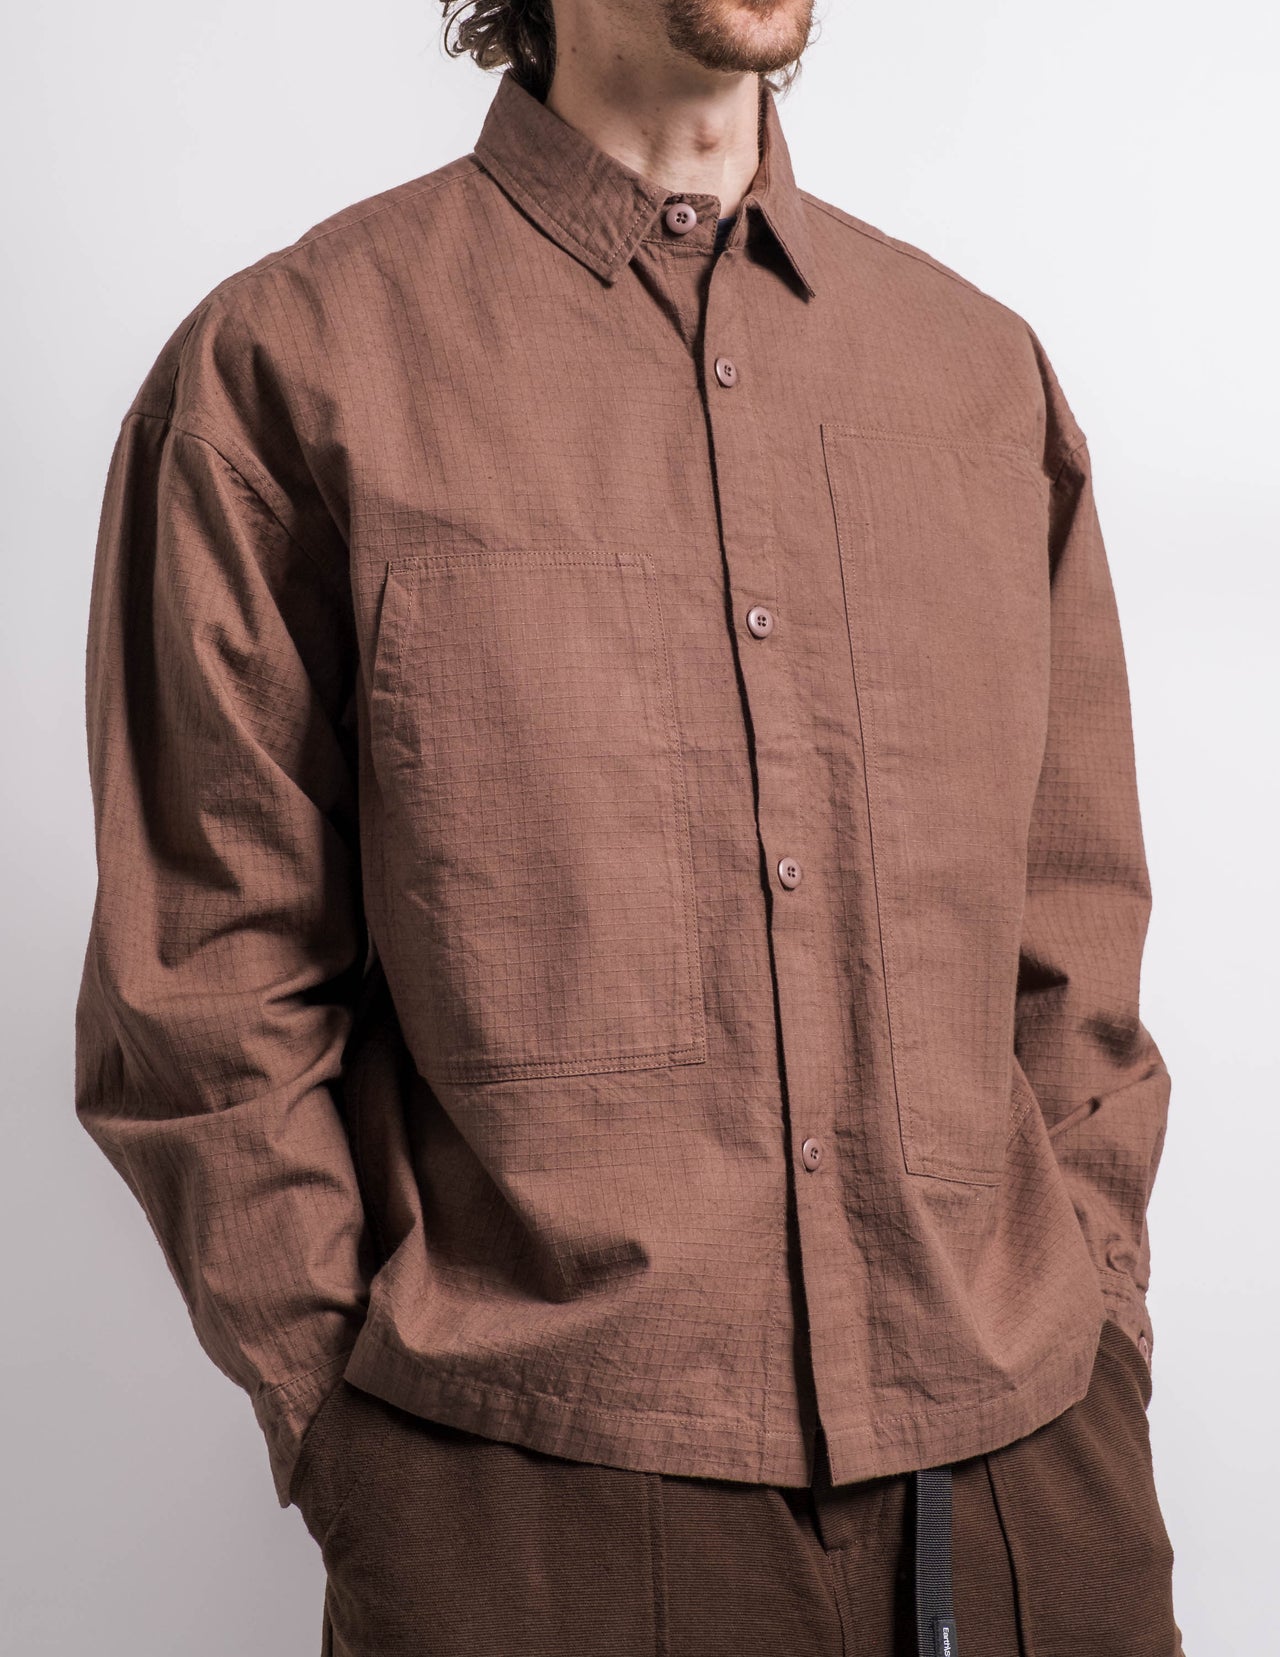 MS-109 Research Shirt in Chestnut/Sandstone